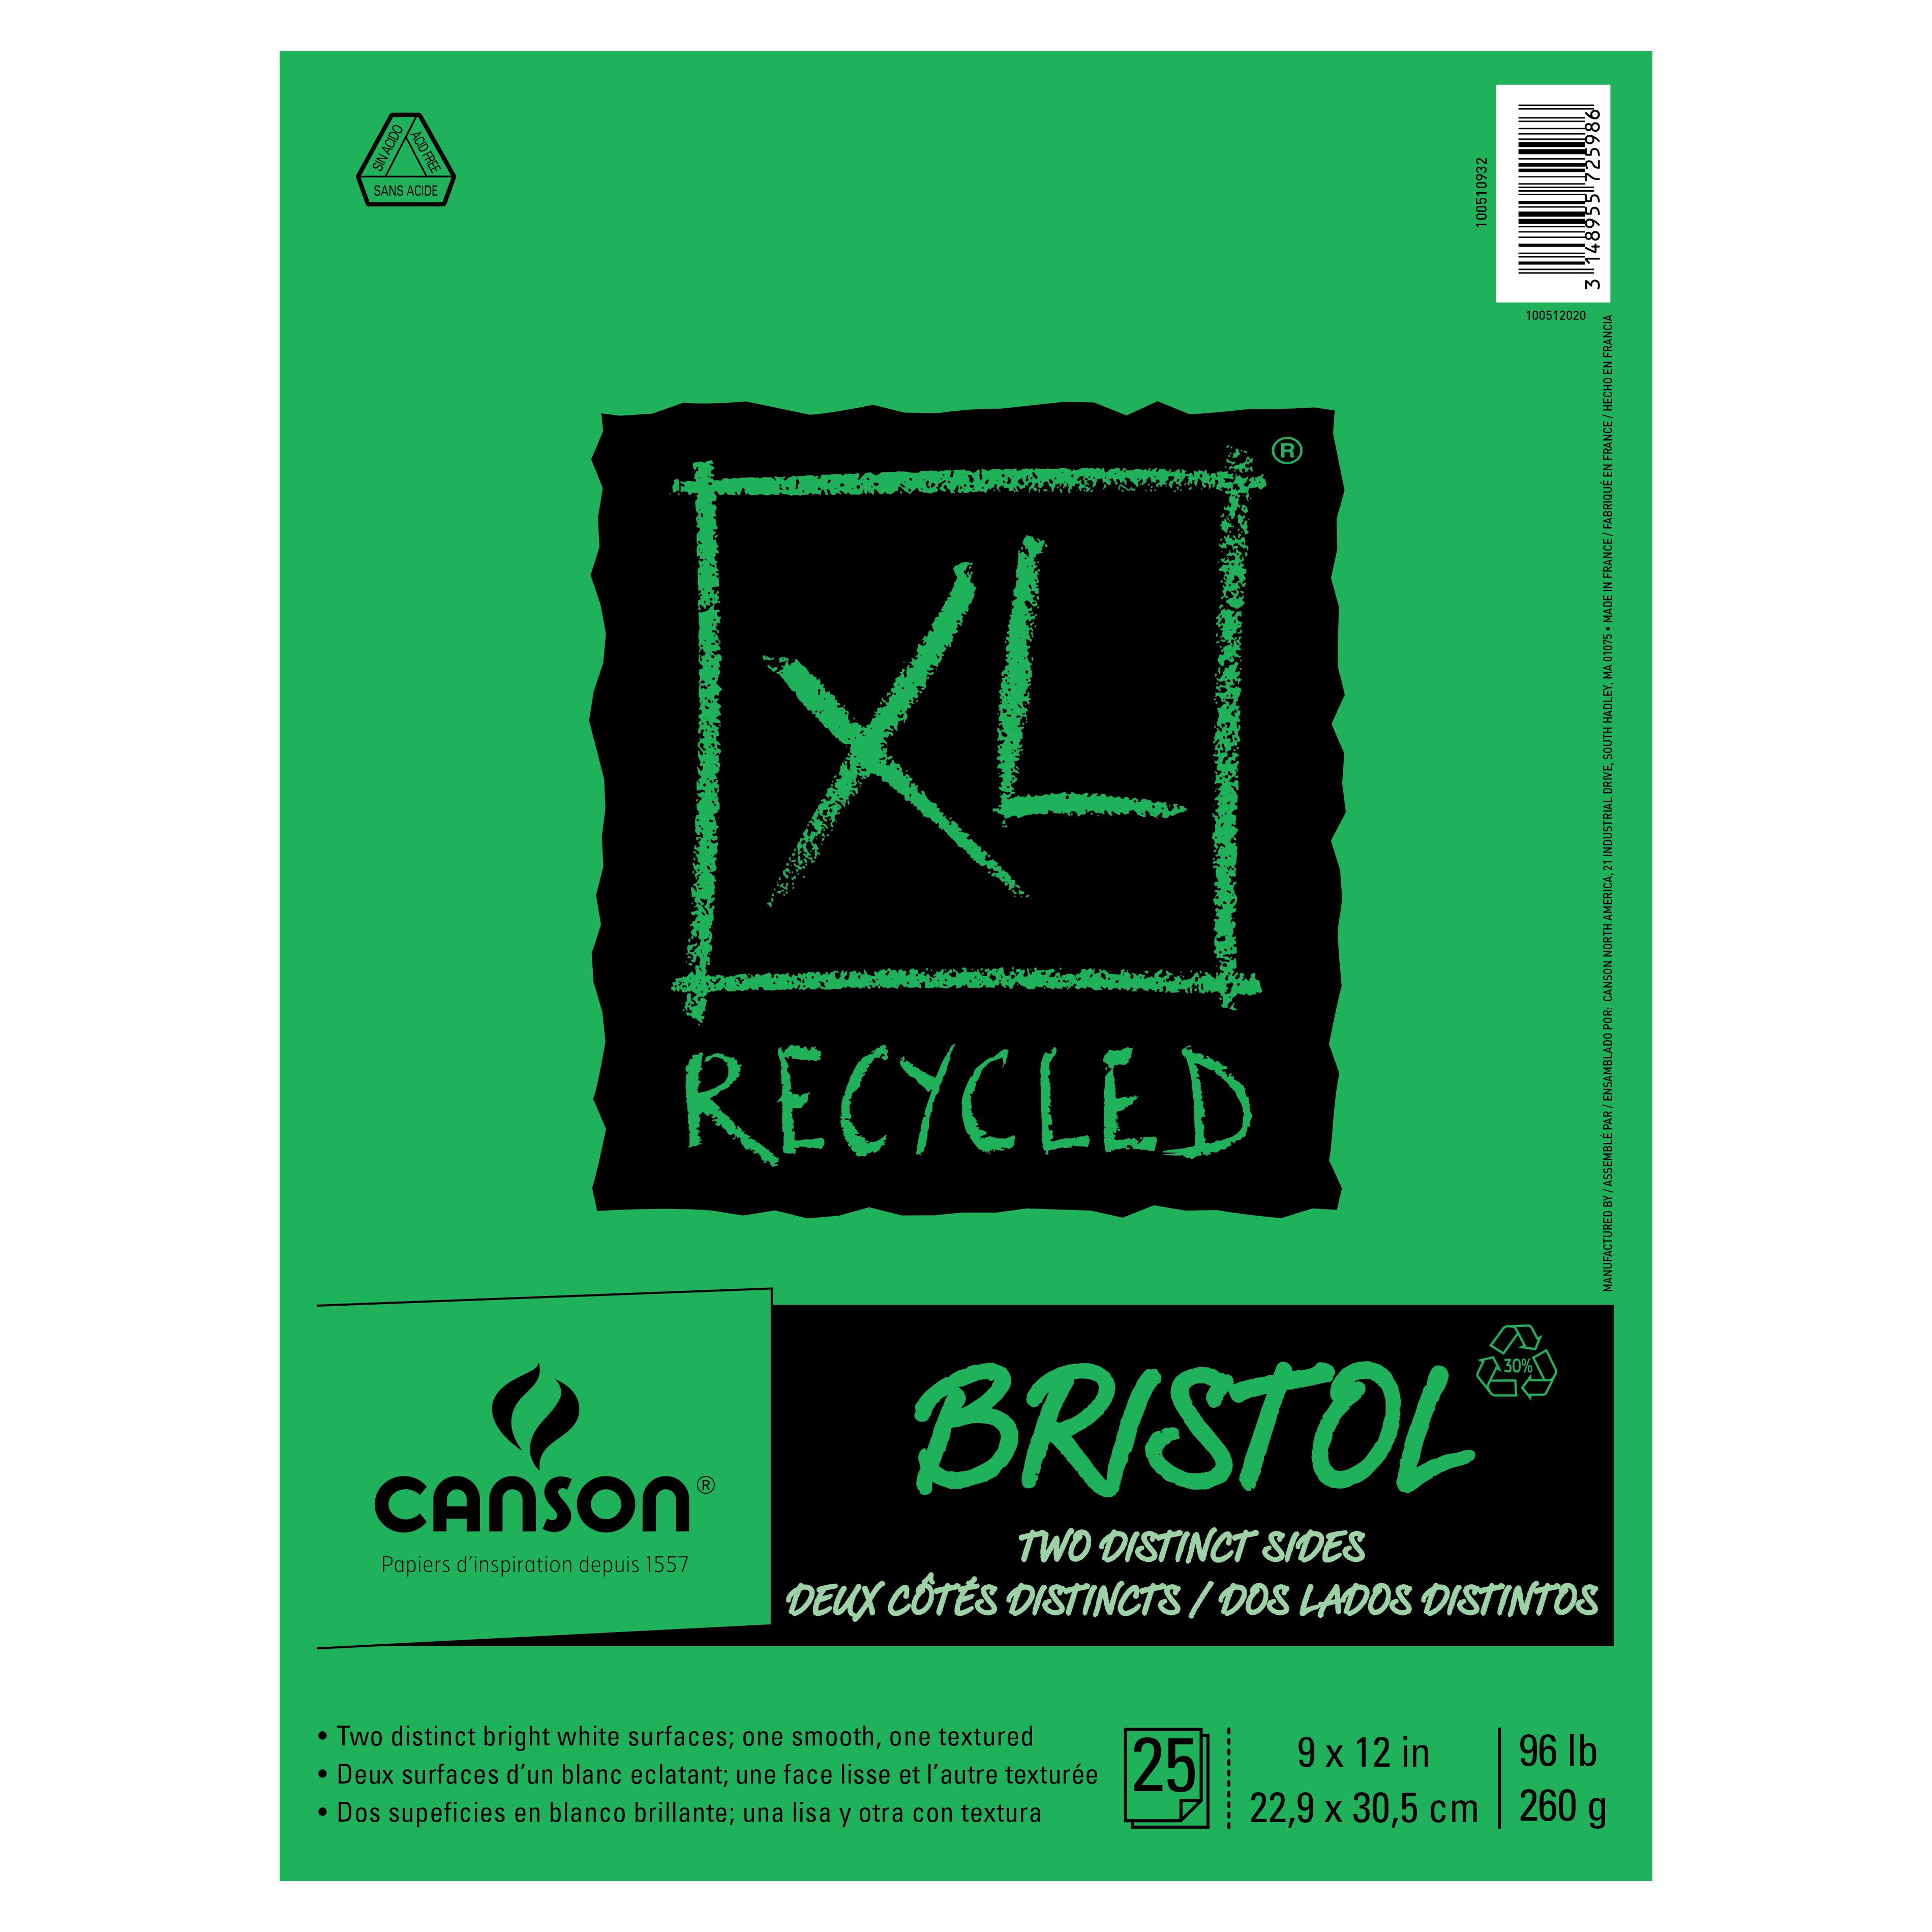 Canson XL Recycled Bristol Pad, 25 Sheets, 9" x 12"